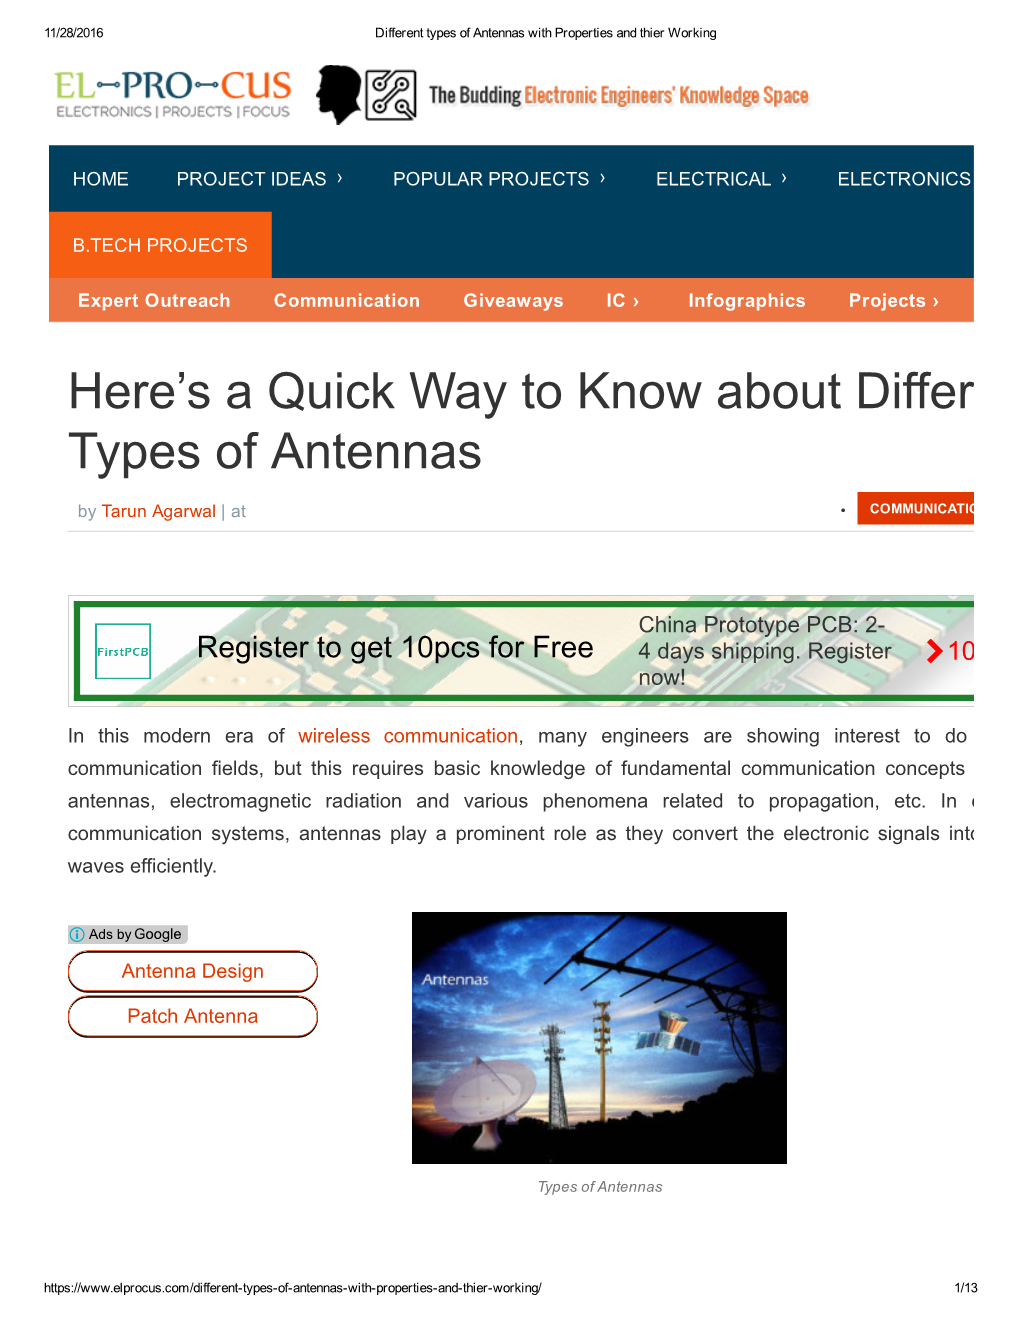 Here's a Quick Way to Know About Different Types of Antennas